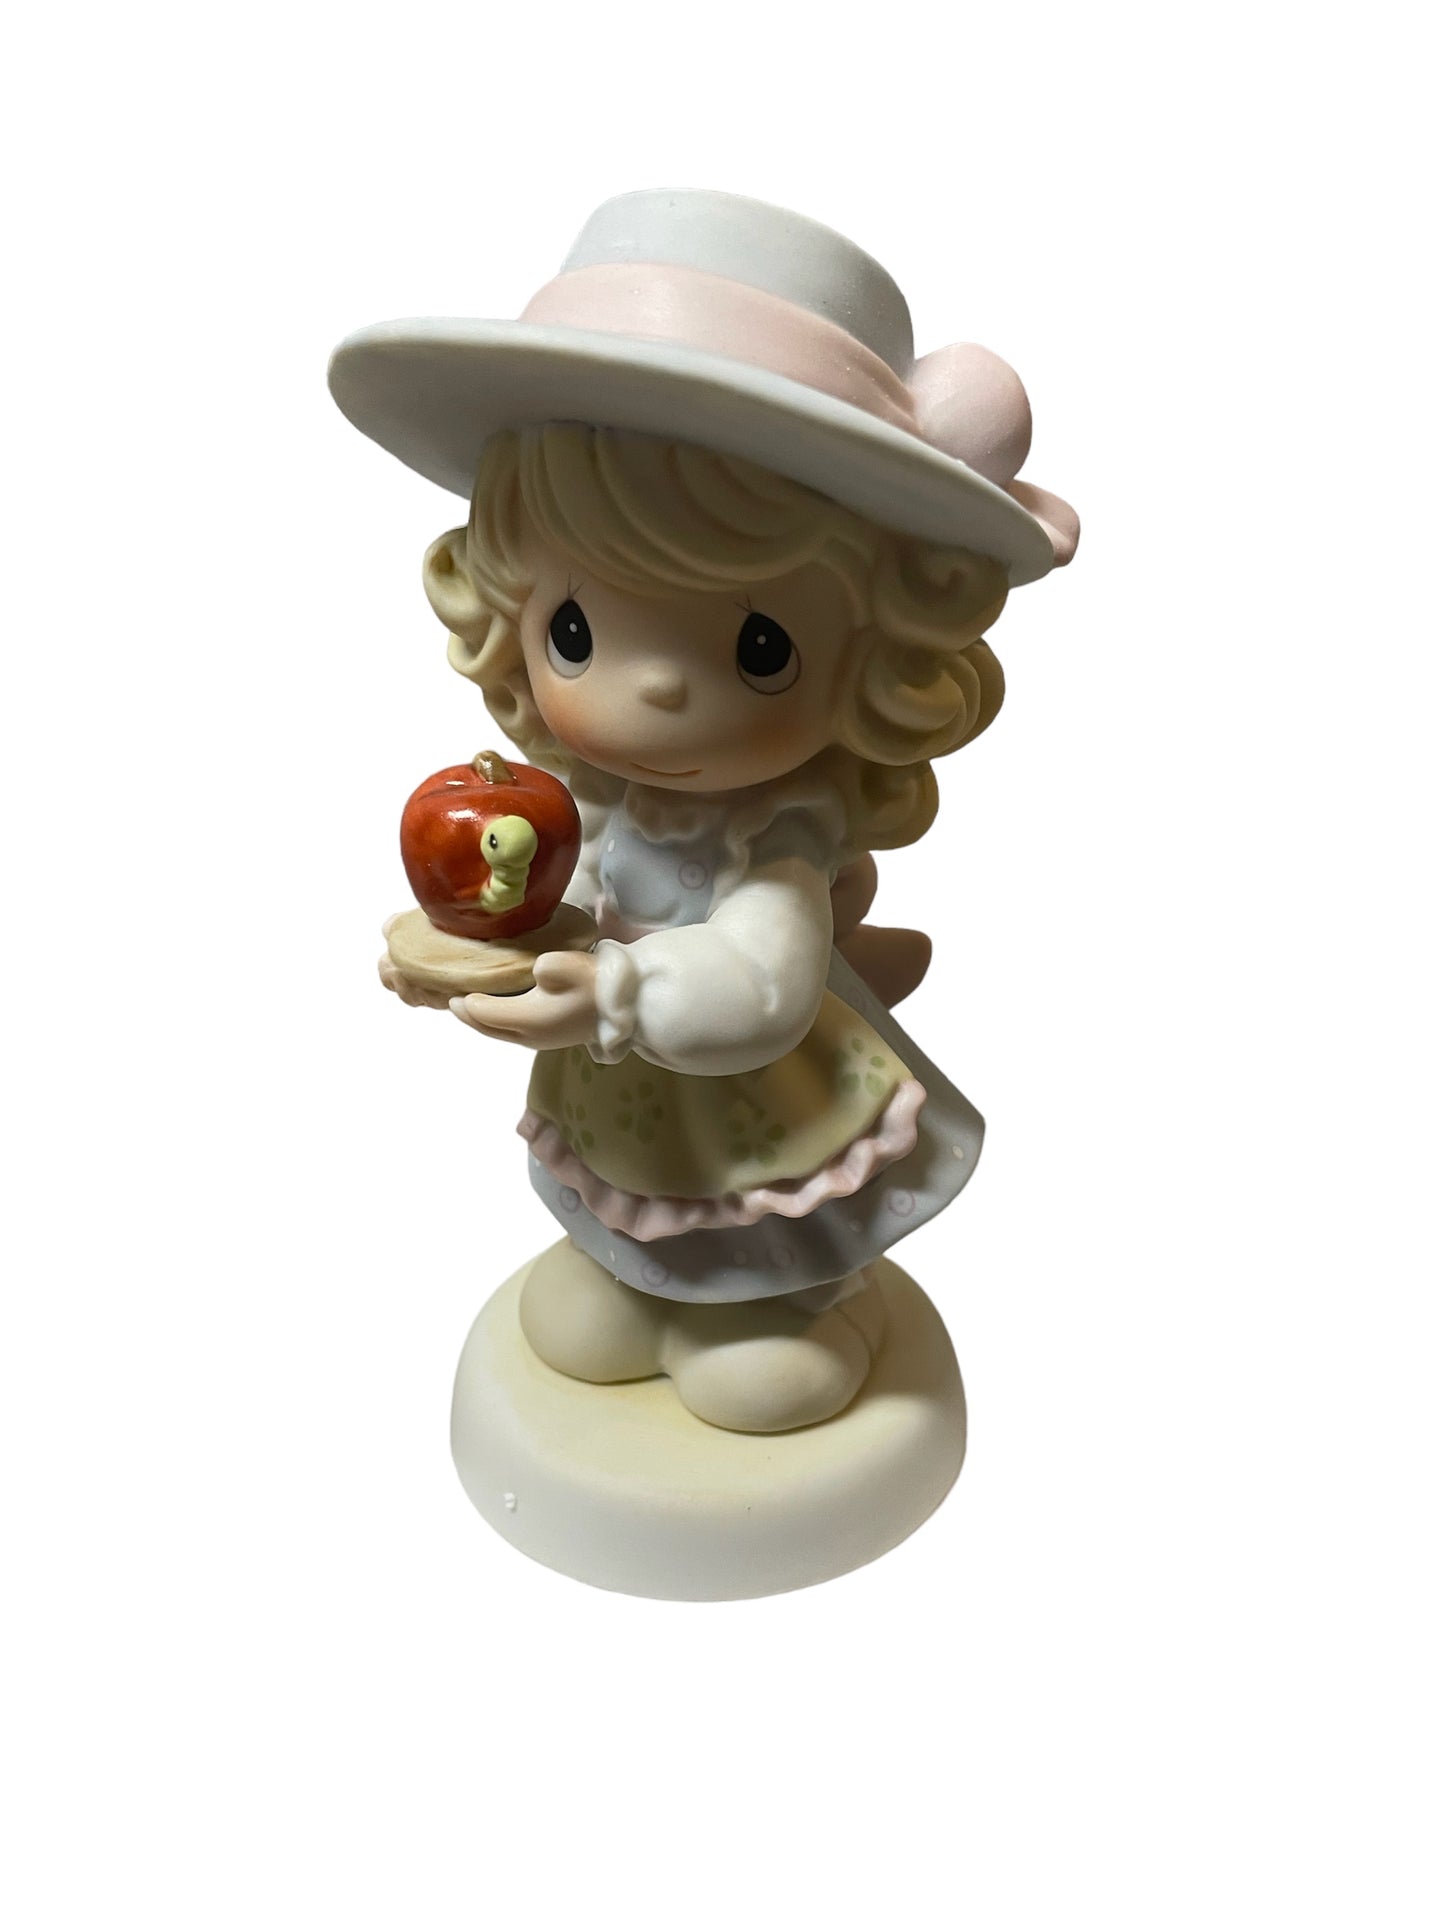 You Are The Apple Of My Eye - Precious Moment Figurine